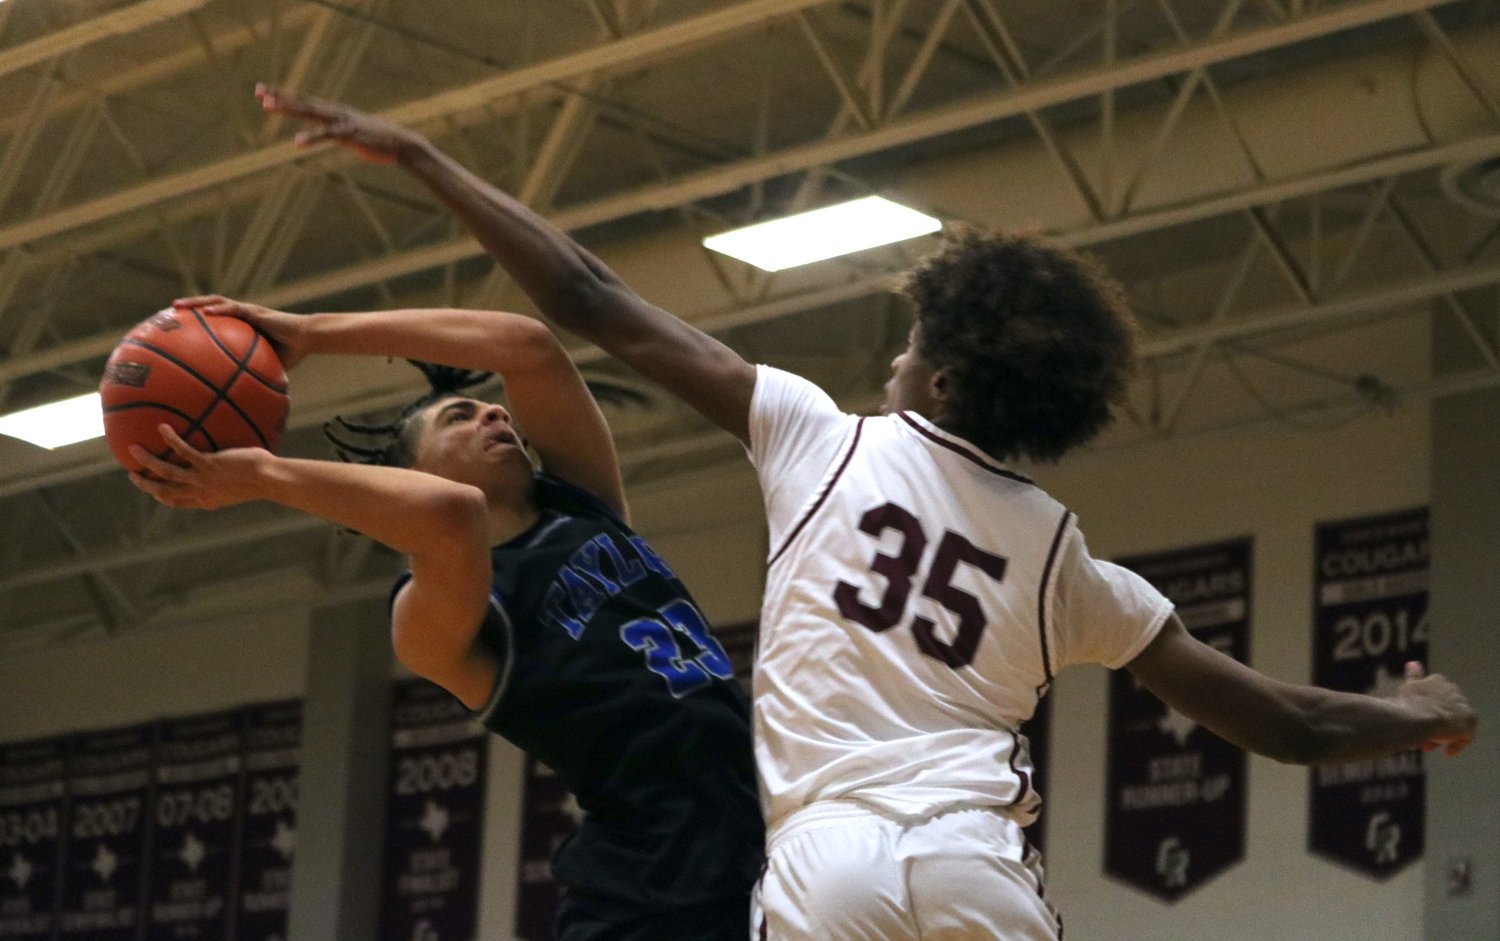 Aidean Rainey shoots over a defender during Wednesday's game between Cinco Ranch and Taylor at the Cinco Ranch gym.